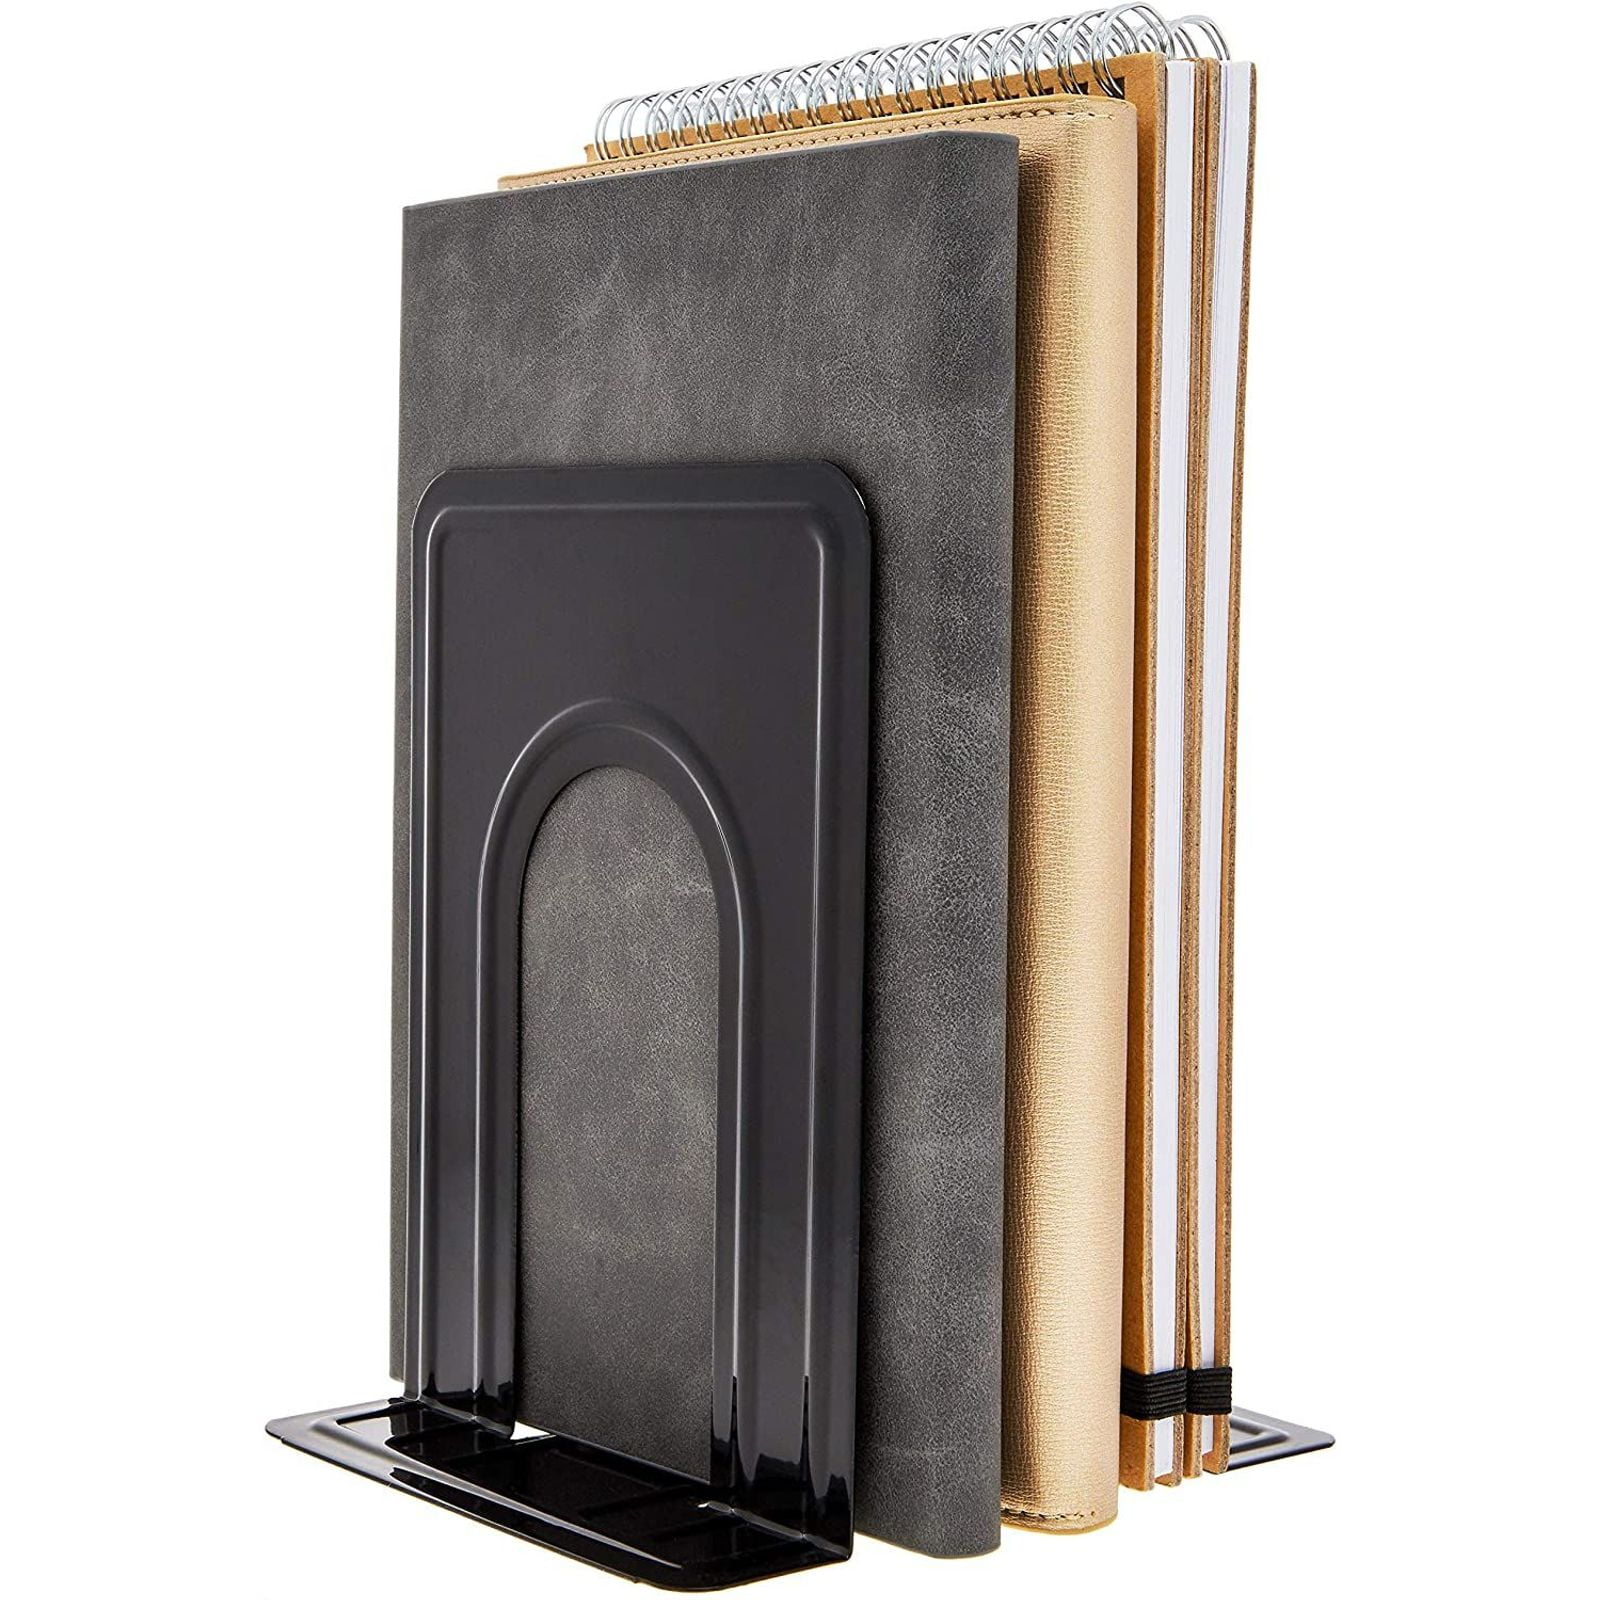 6.5 x 5.7 x 4.9 Inch Heavy Duty Metal Black Bookend Support Bookends Set of 